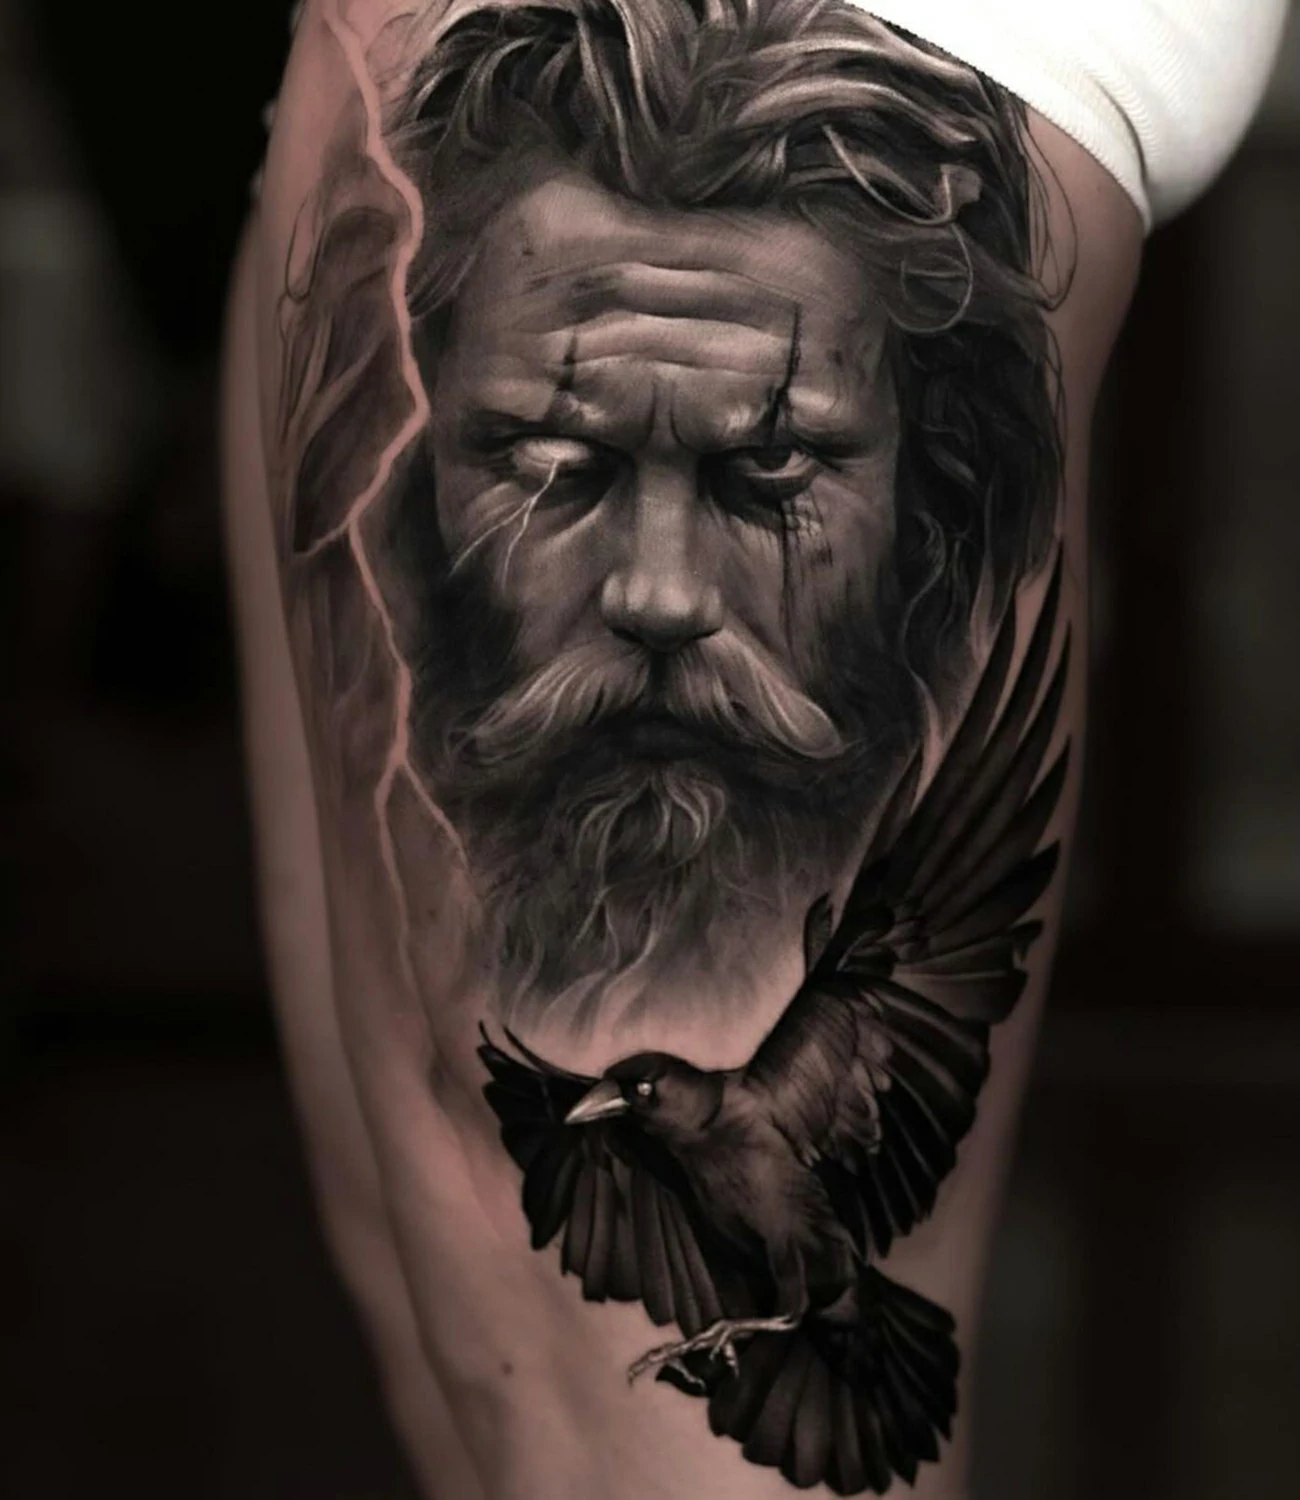 Odin norse raven tattoos: Tattoos featuring Odin’s ravens from Norse mythology.